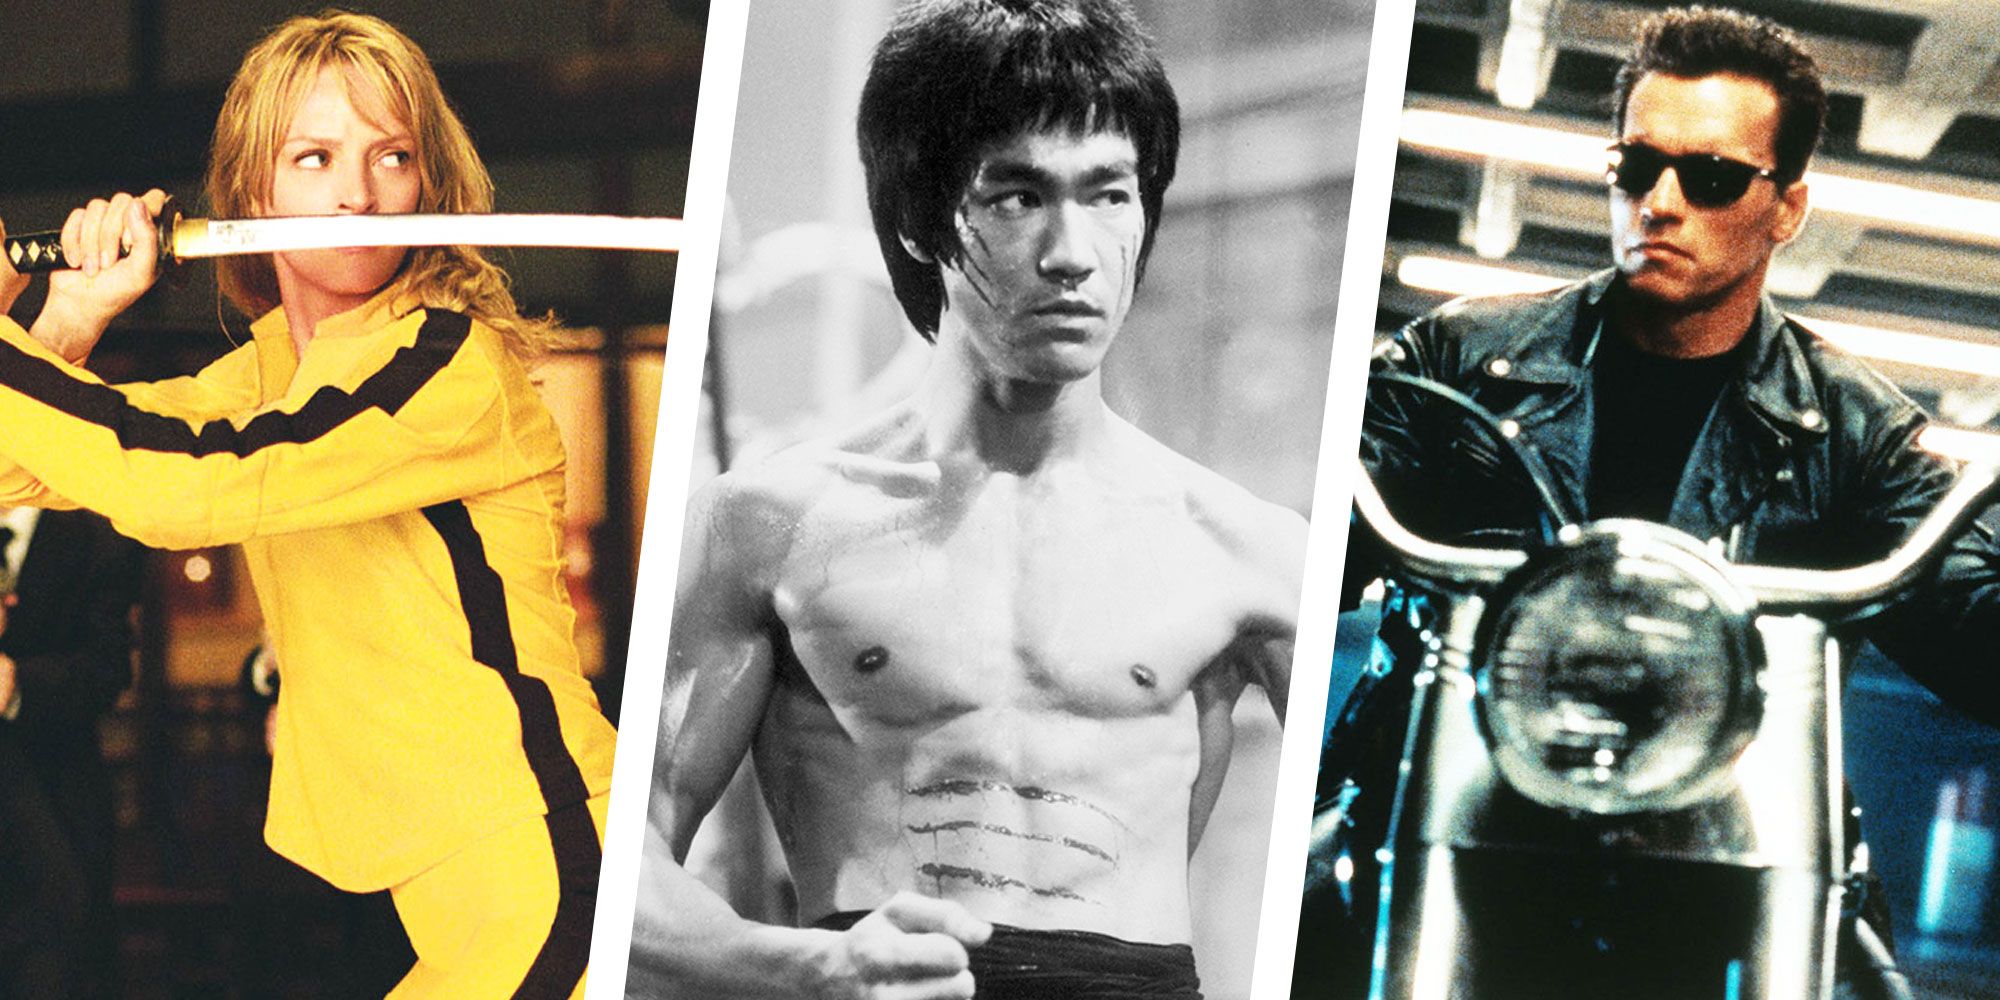 The 13 most powerful action movies of all time